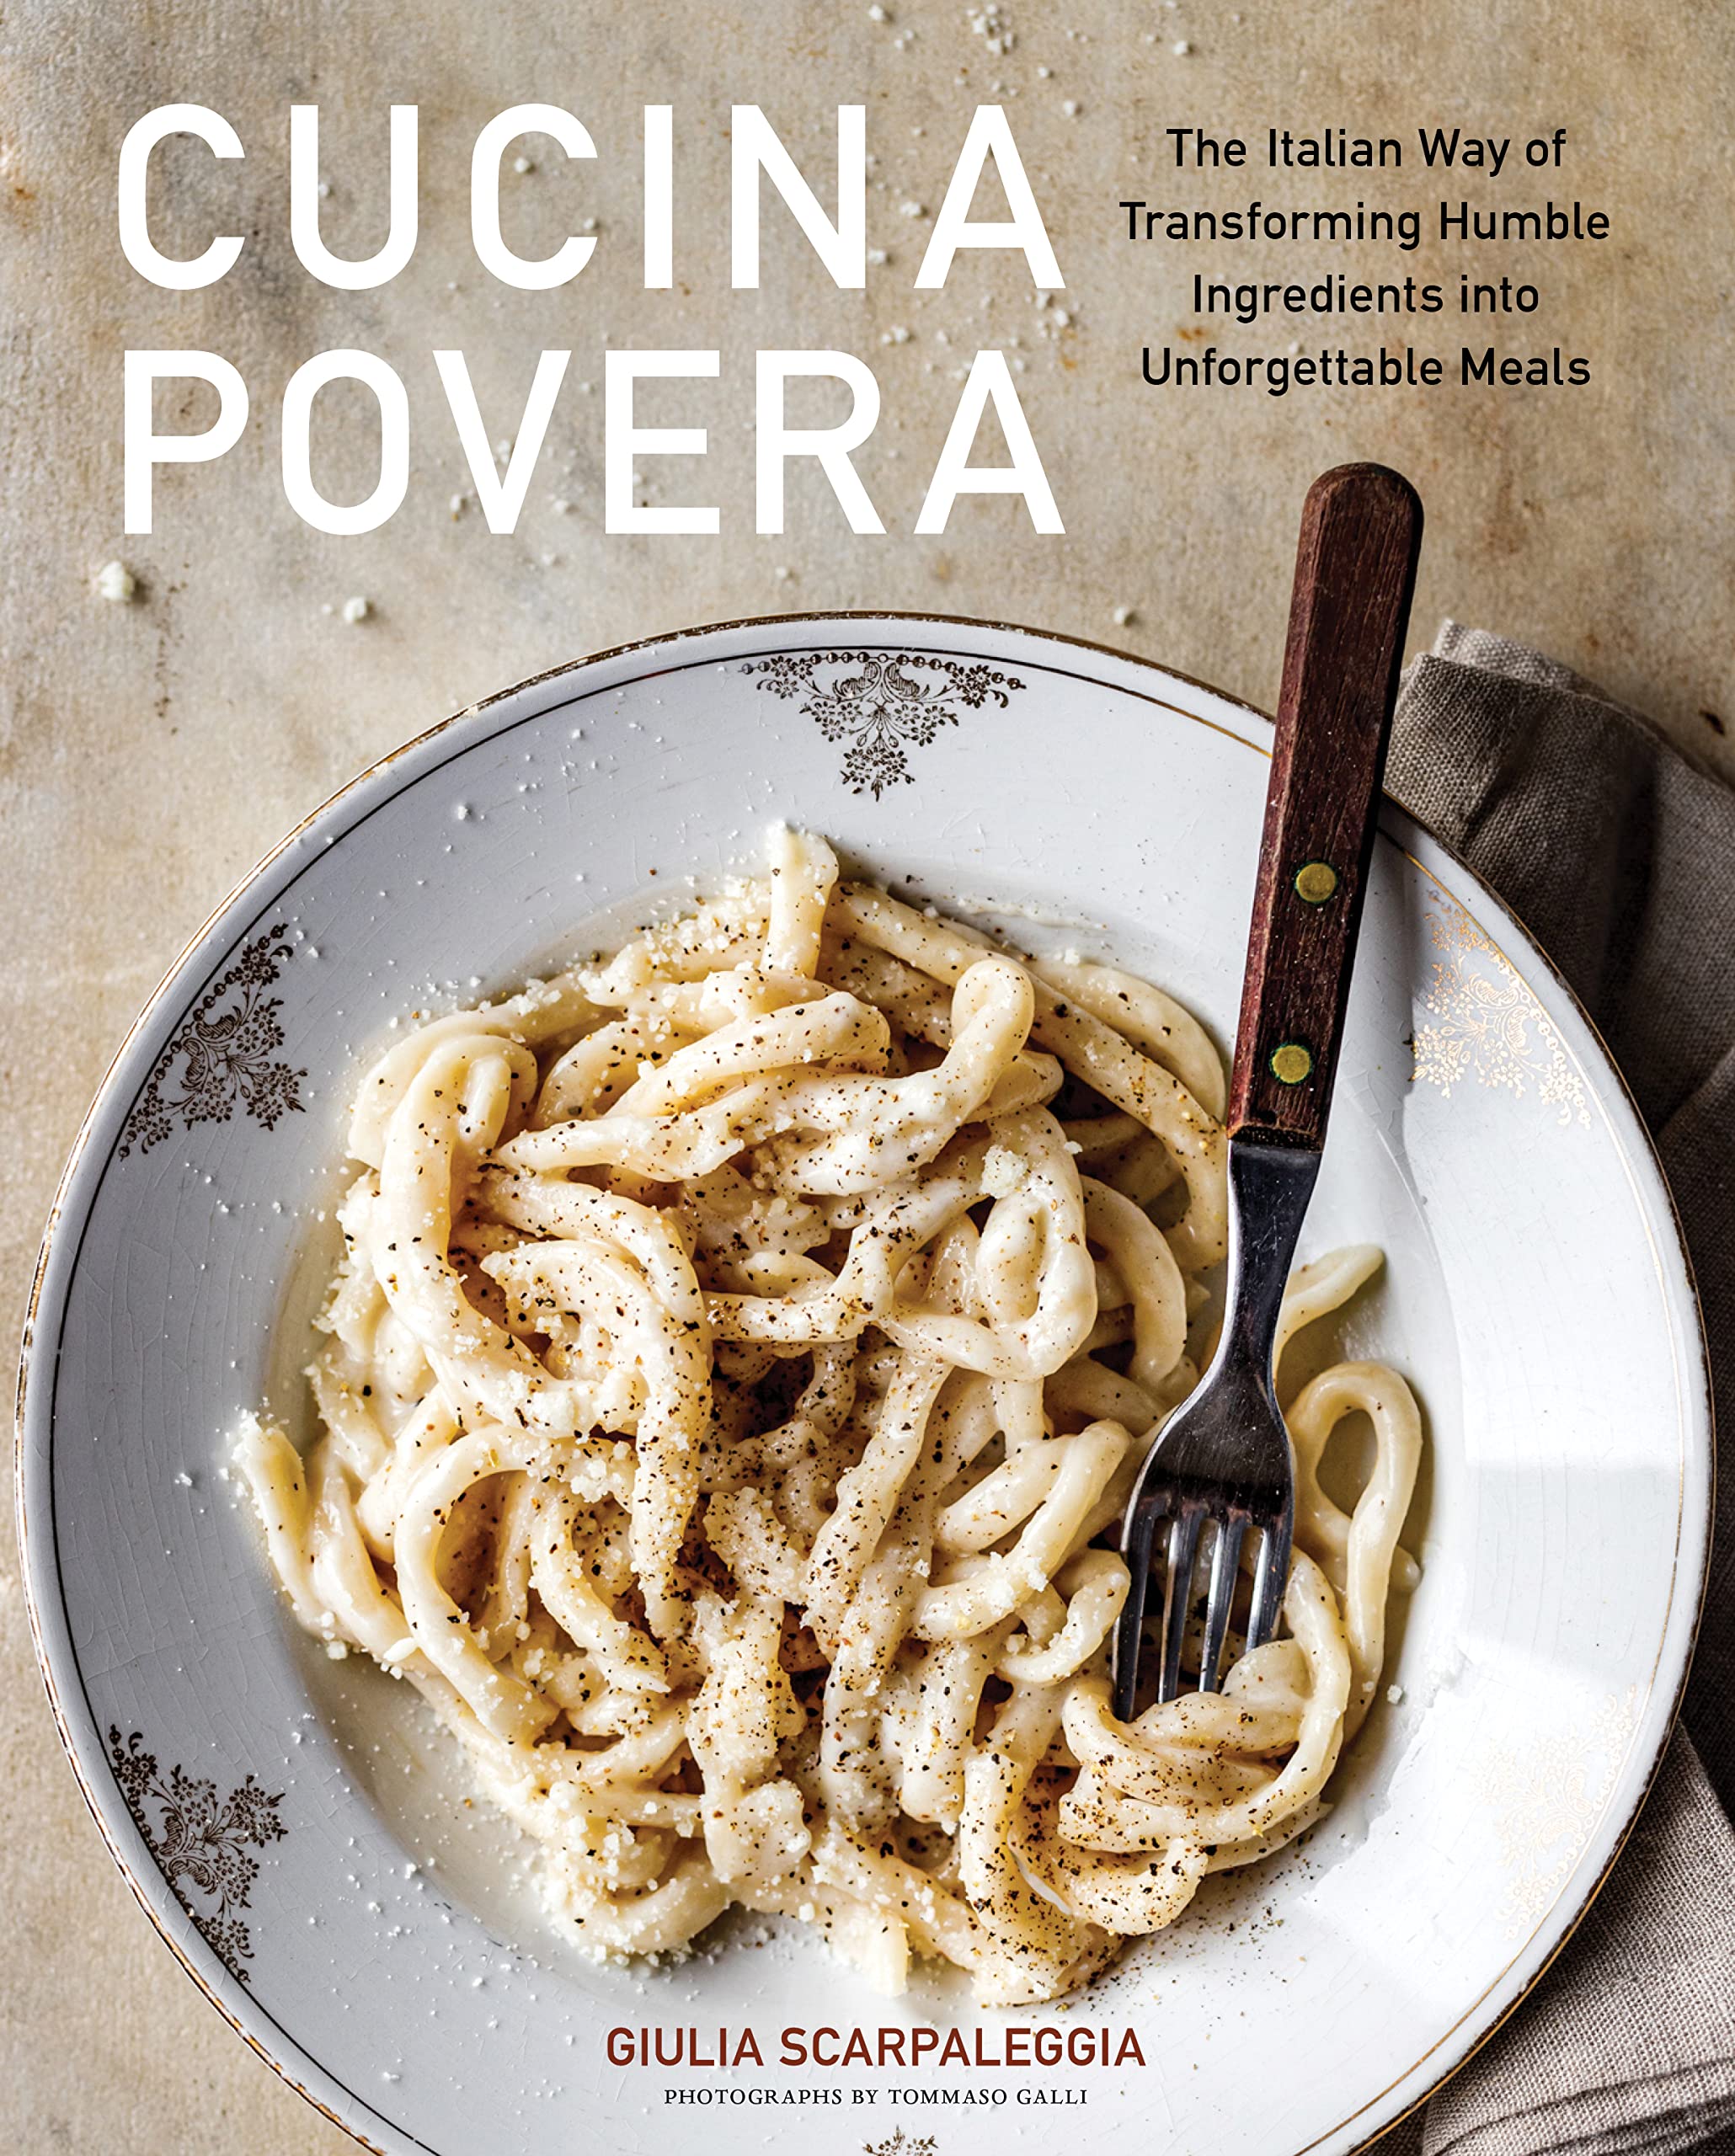 Cucina Povera: The Italian Way of Transforming Humble Ingredients into Unforgettable Meals (Giulia Scarpaleggia) *Signed*